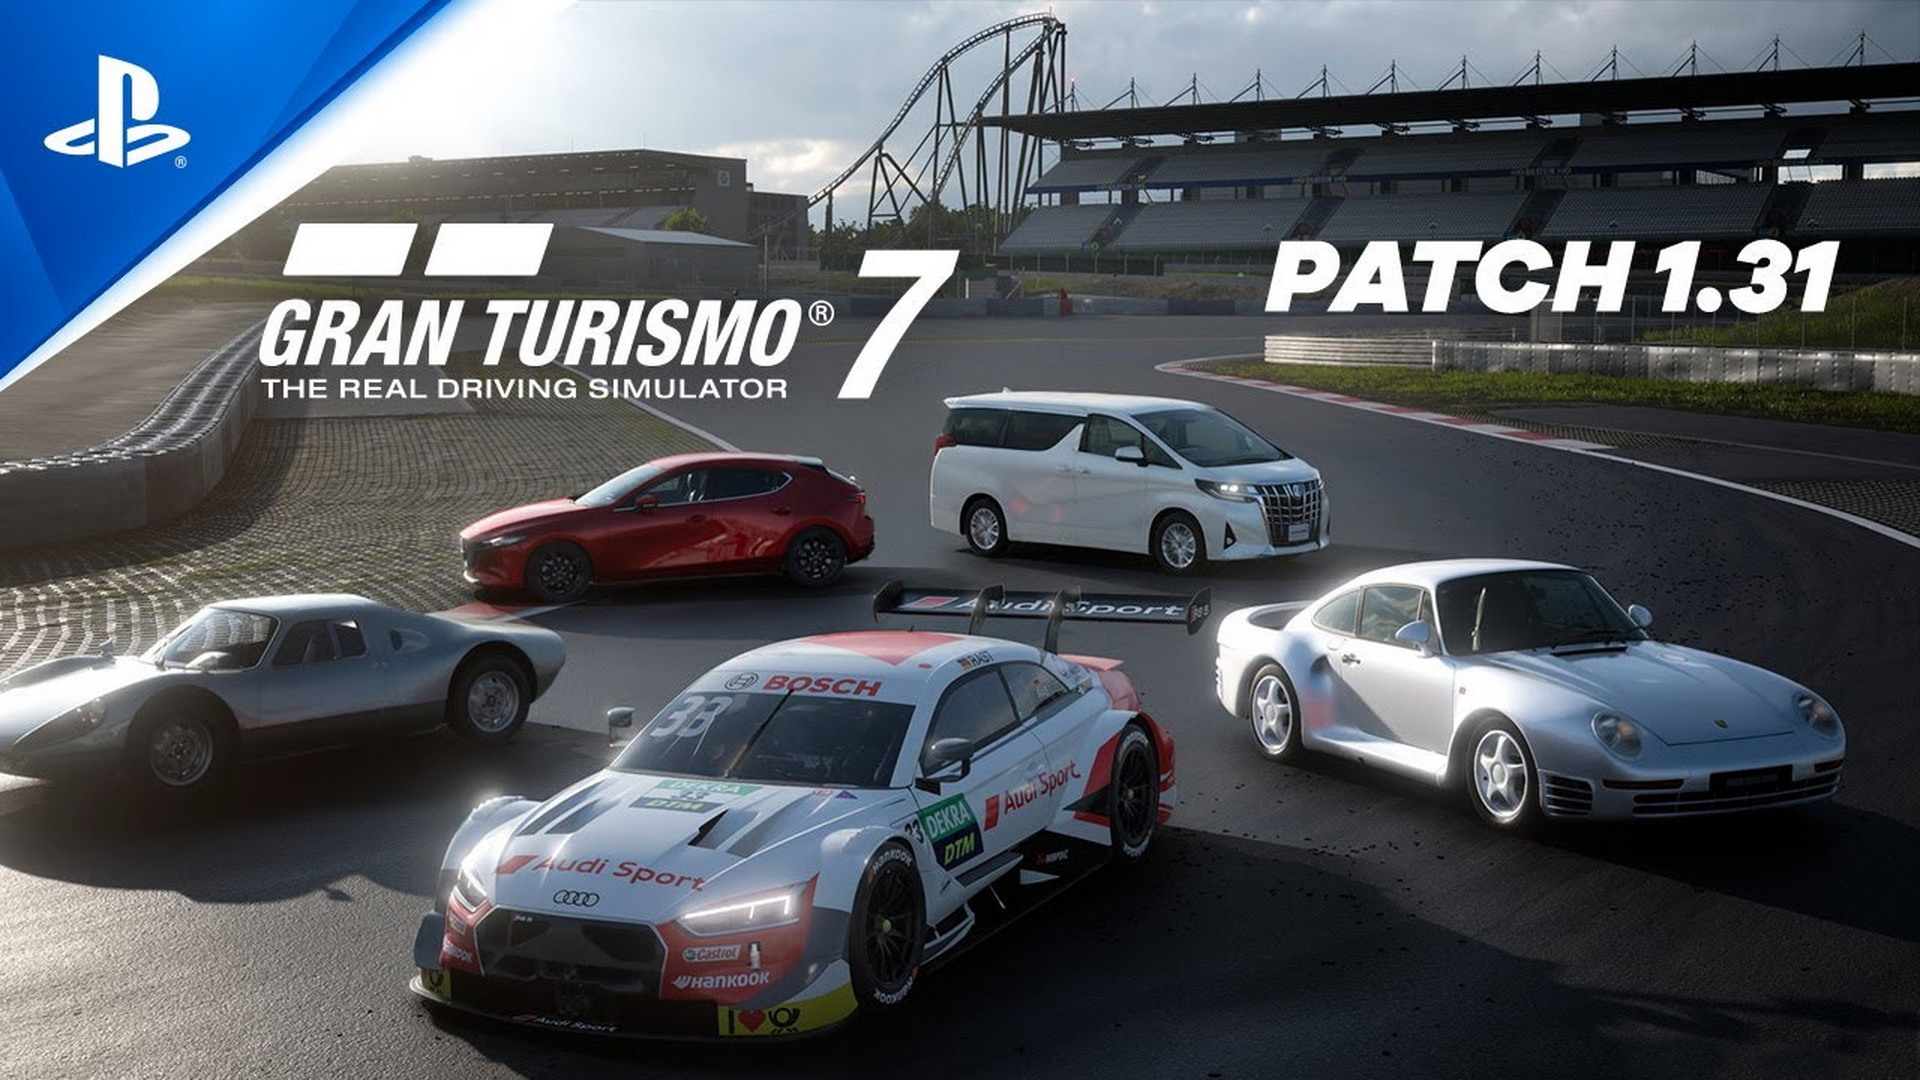 Gran Turismo 7's Free PS5, PS4 Update Adds More Cars, Single Player Content